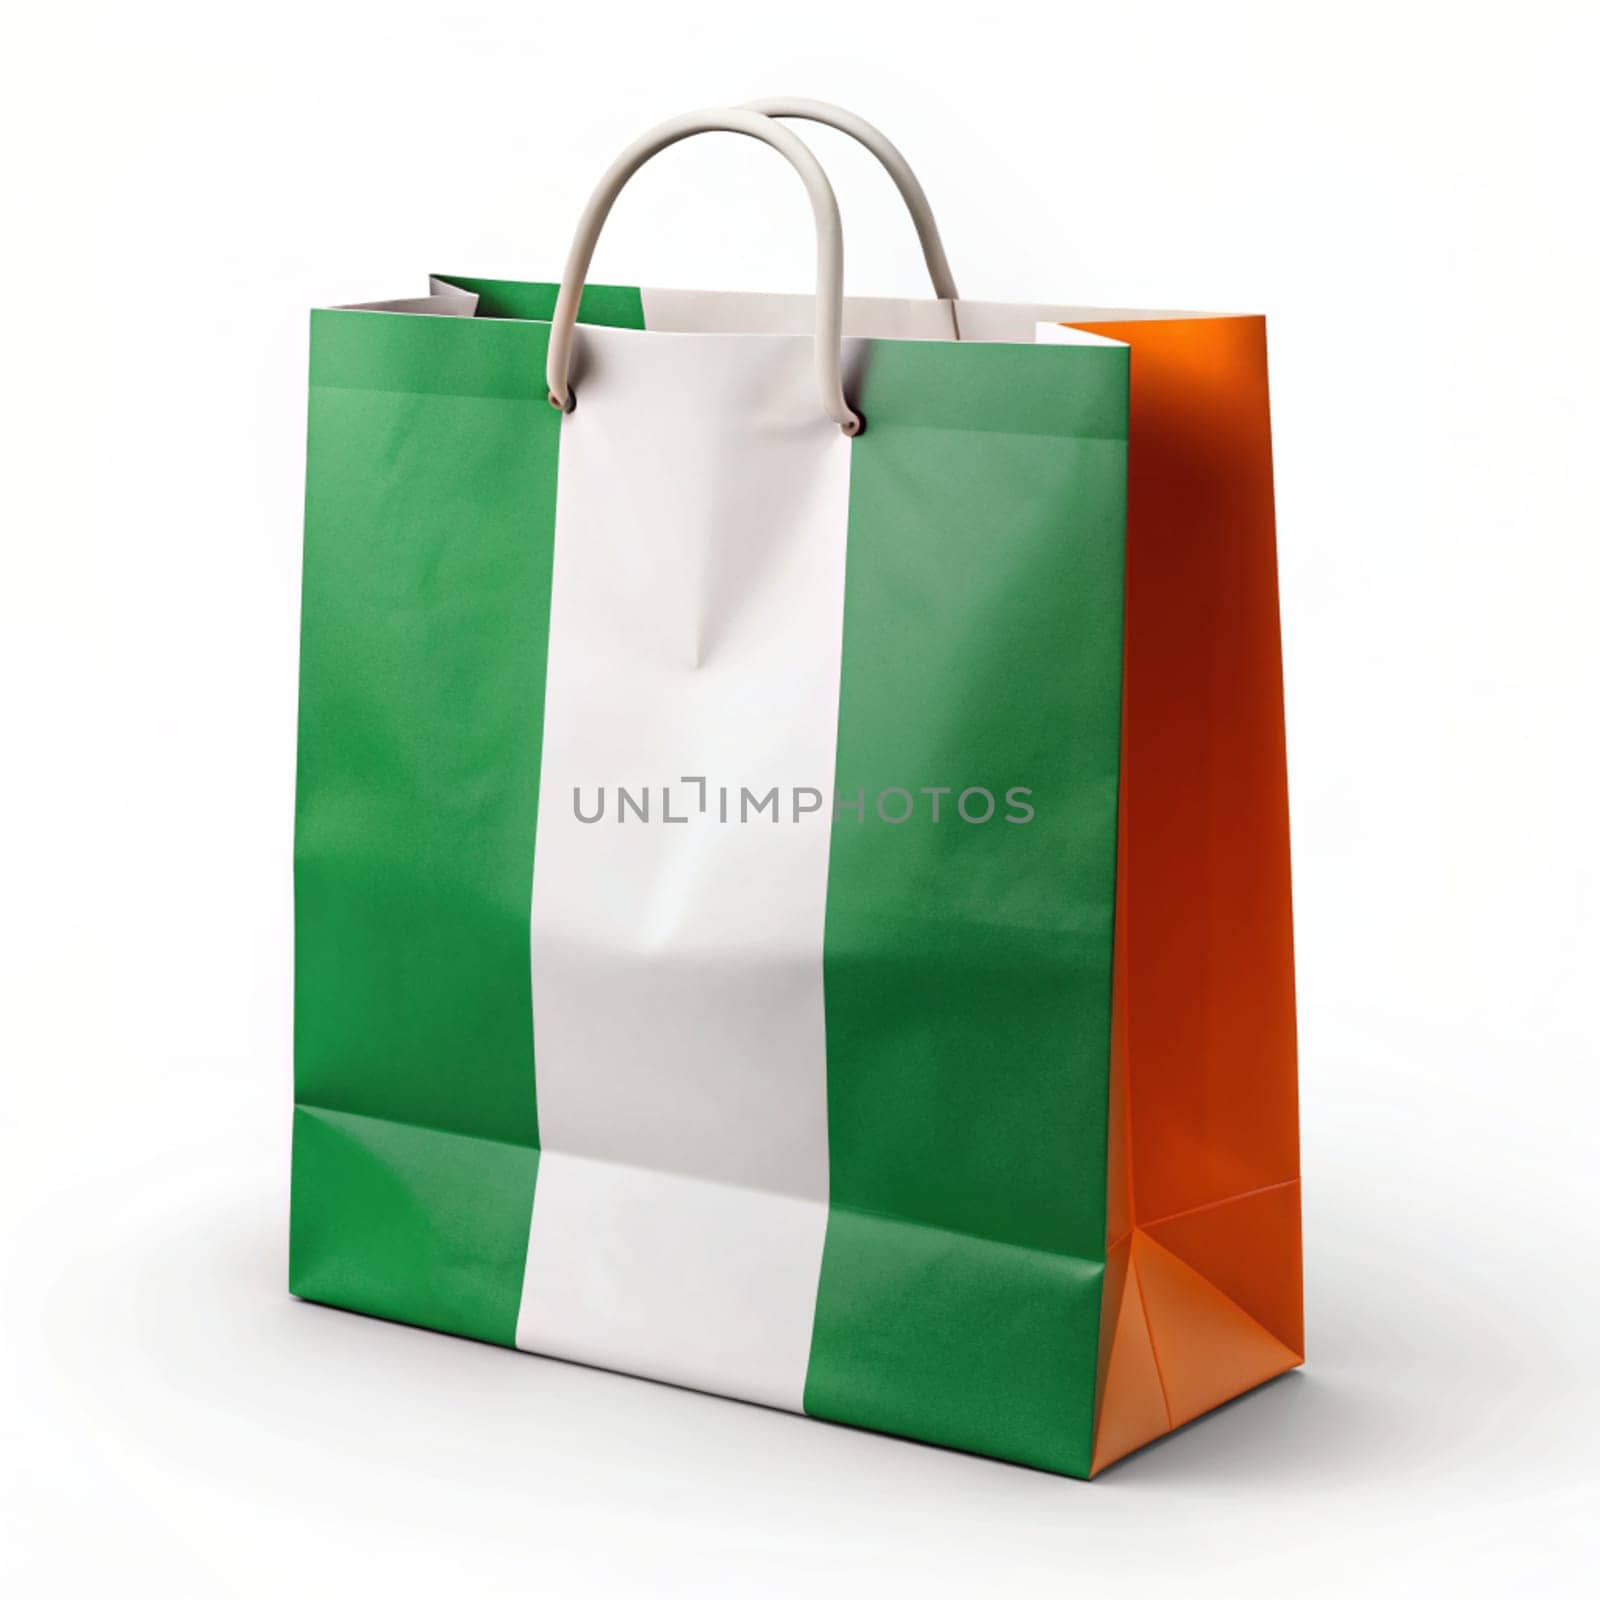 IRELAND FLAG SHOPPING BAG WHITE BACKGROUND. Irish Treasures: Flag-Inspired Shopping Delight. Irish Treasures: Flag-Inspired Shopping Delight - Perfect for Tourists Souvenir Enthusiasts by Andrii_Ko